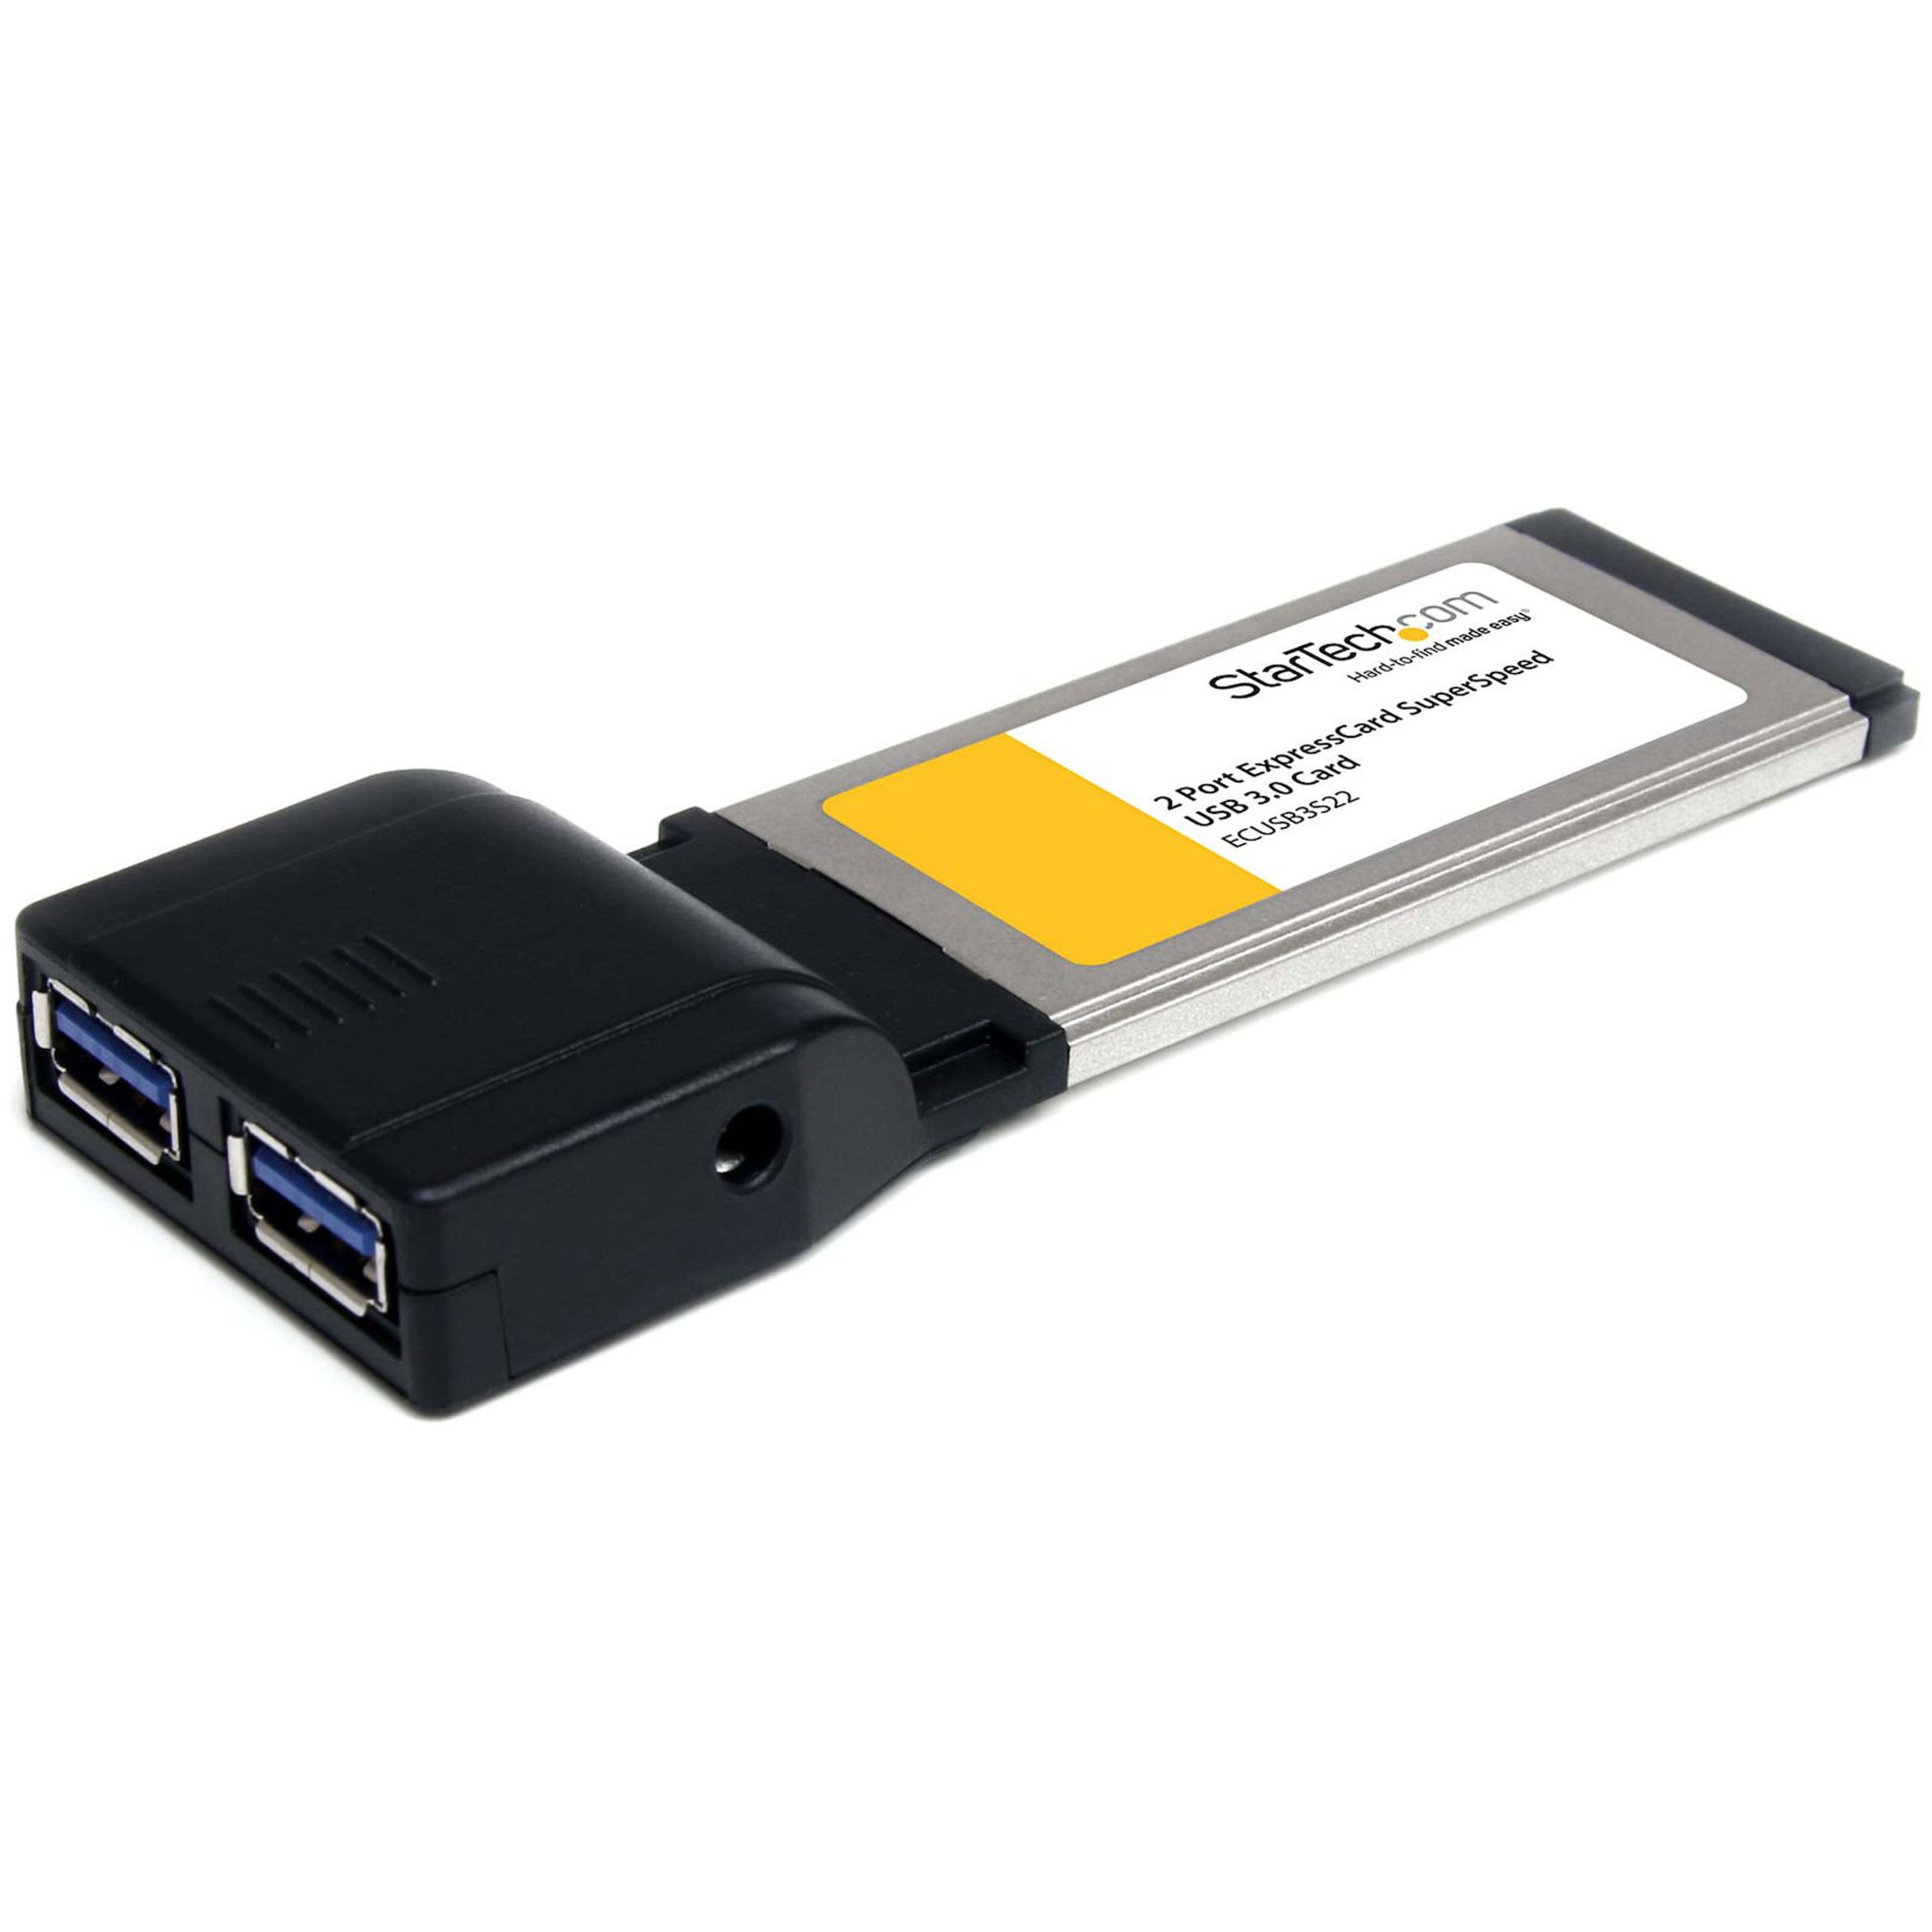 Startech .com 2 Port ExpressCard SuperSpeed USB 3.0 Card Adapter with UASP SupportAdd 2 USB 3.0 ports to your Laptop through an ExpressCard… ECUSB3S22